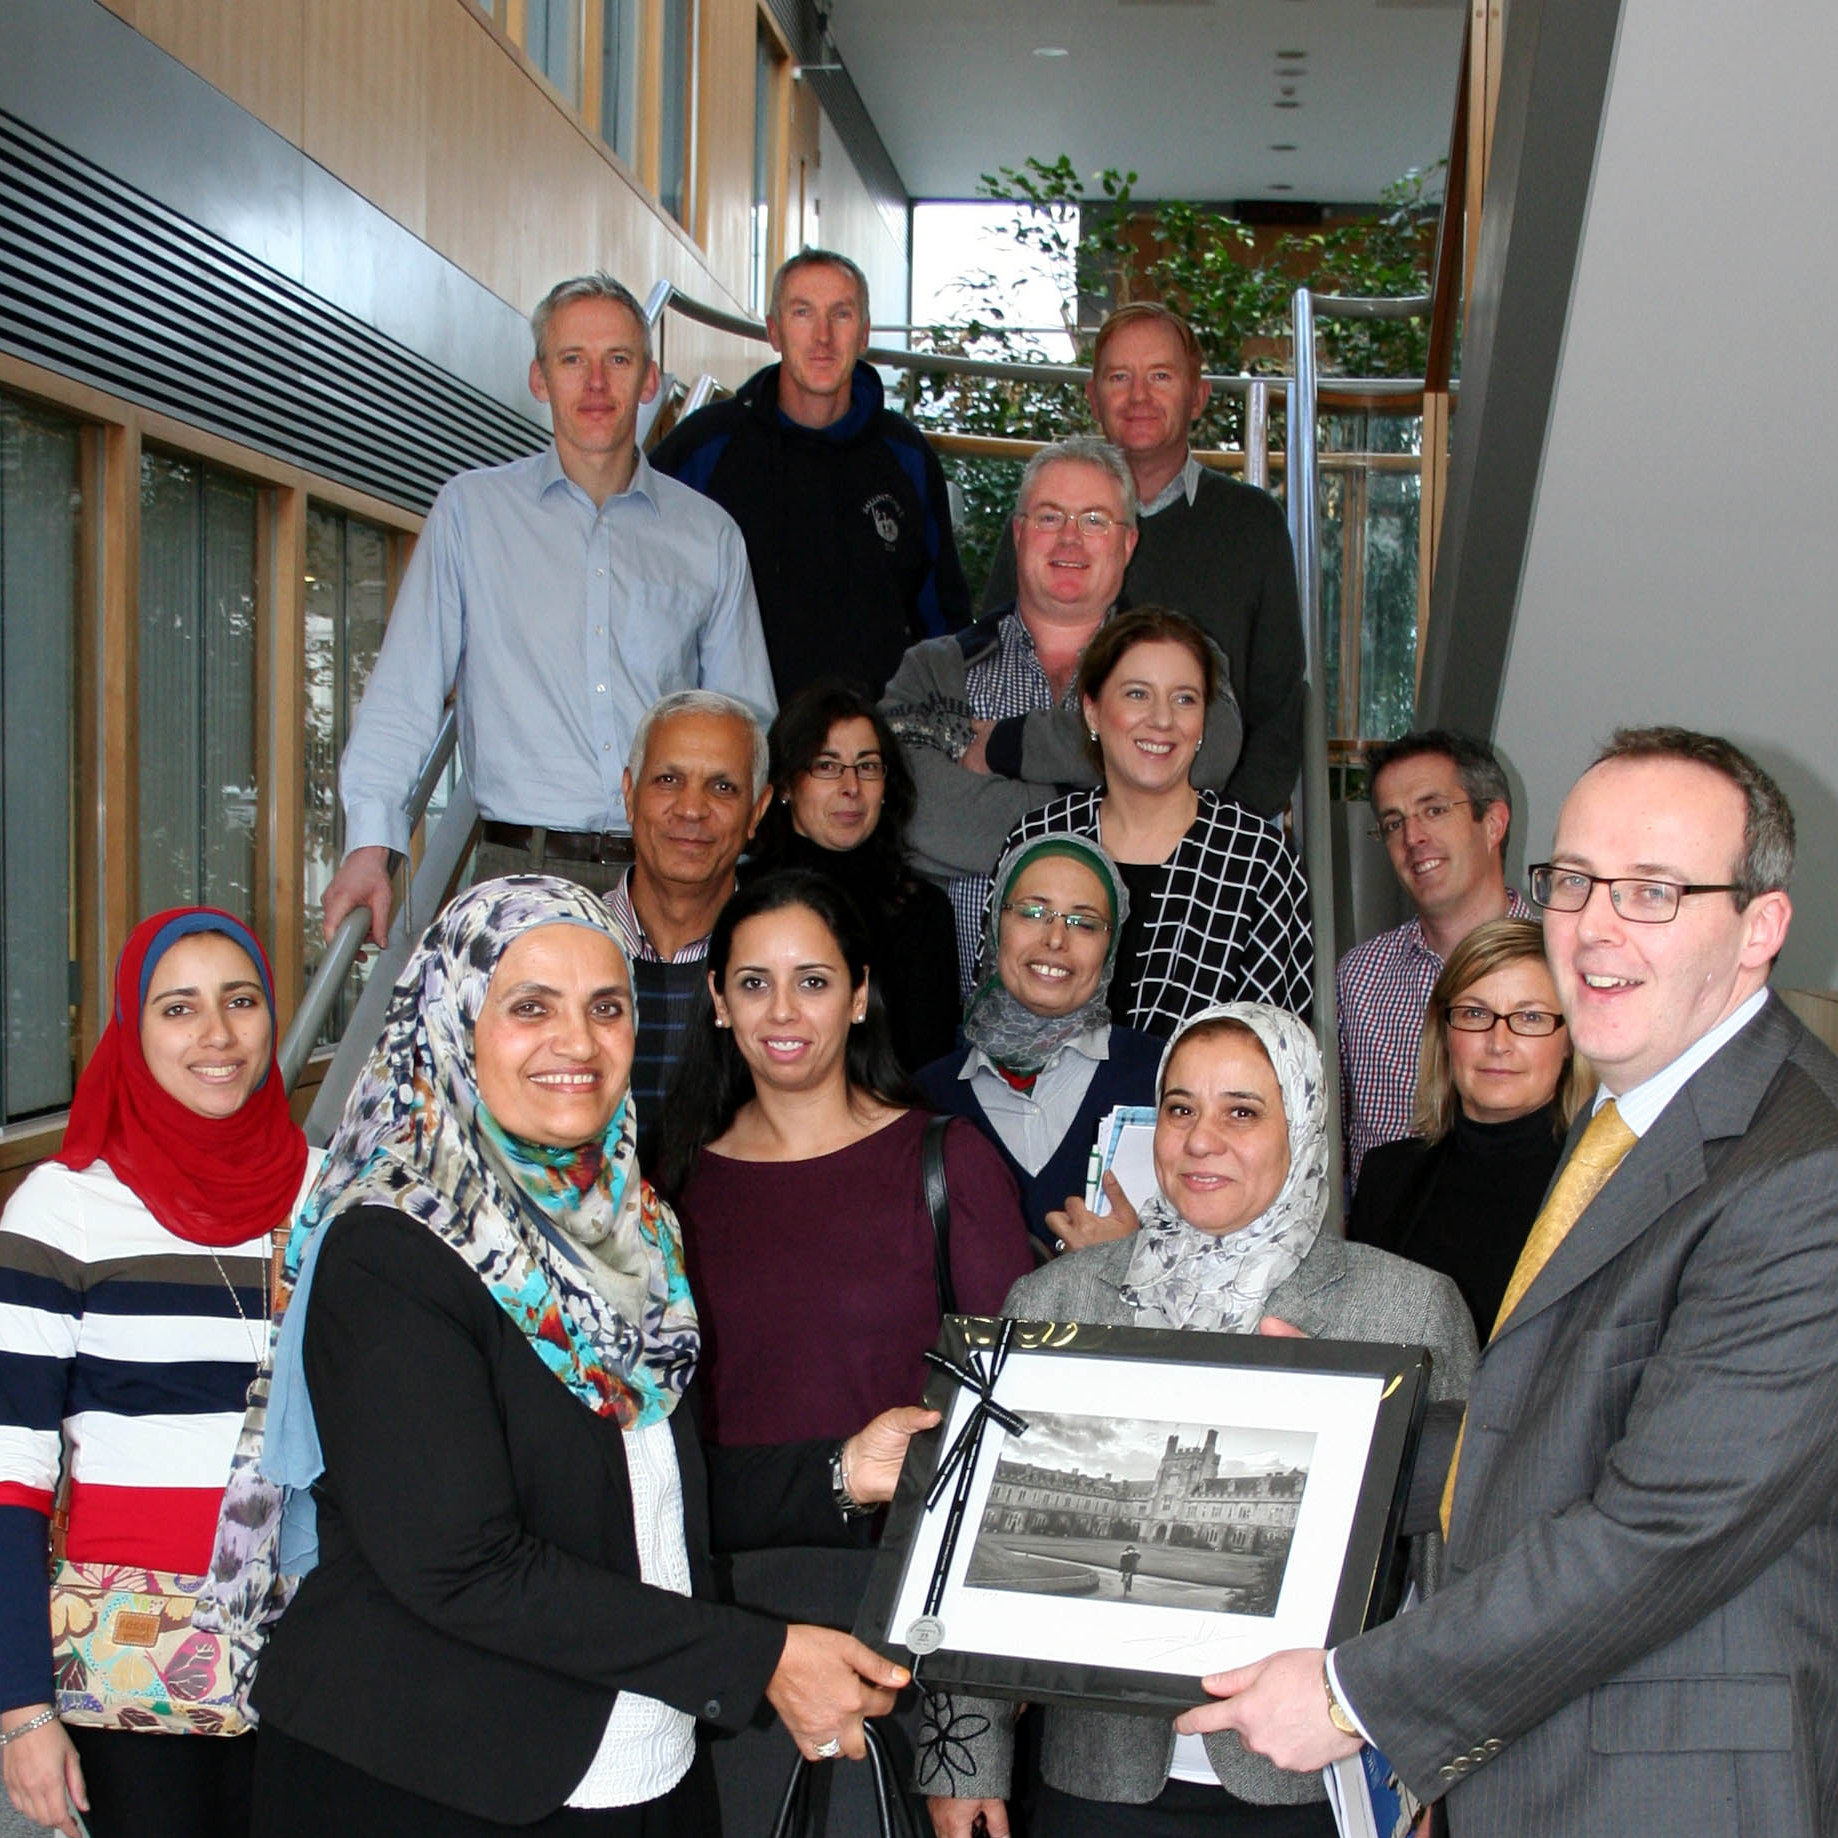 The School of Pharmacy (UCC) welcomes colleagues from the School of Pharmacy, Futures University in Egypt to the Cavanagh Pharmacy Building.  